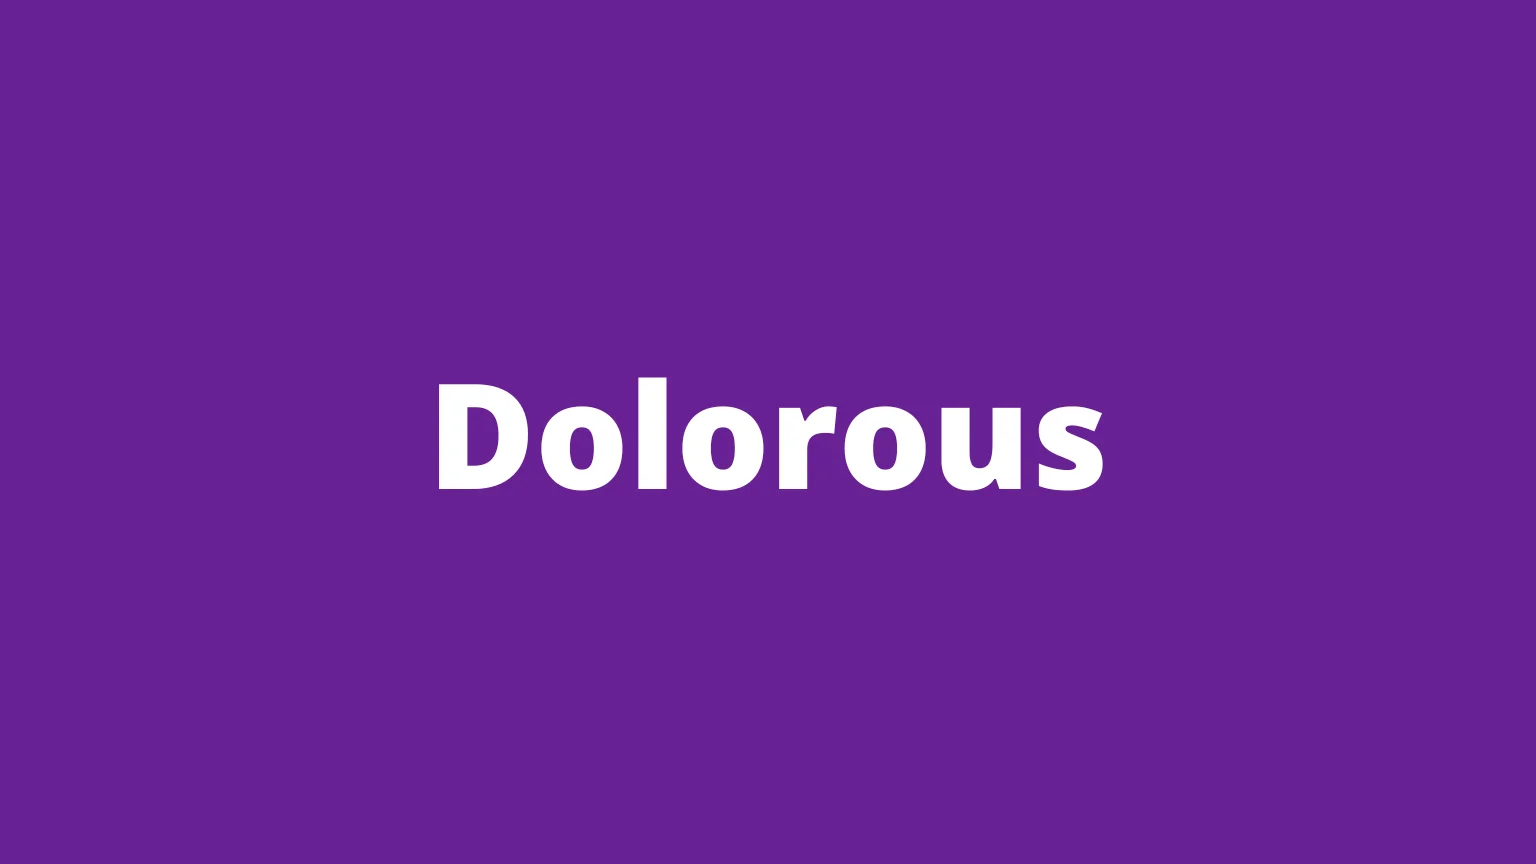 The word dolorous and its meaning